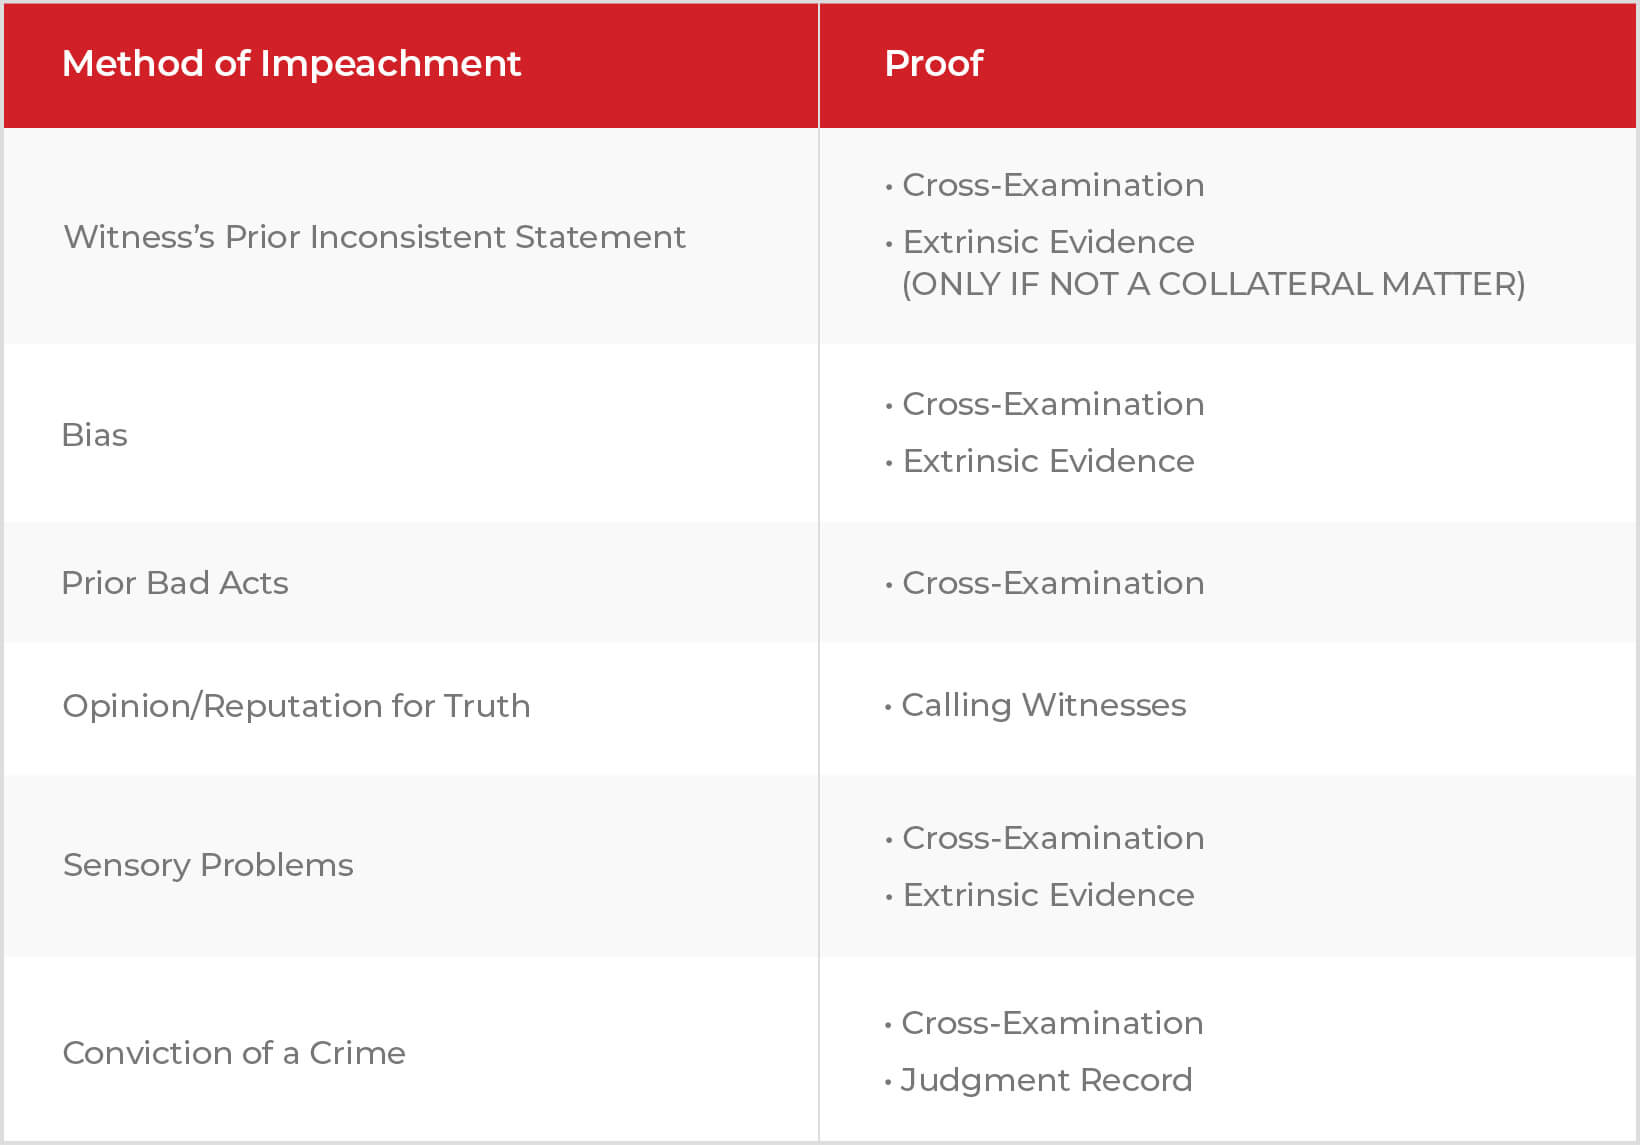 Table of methods of impeachment and proof